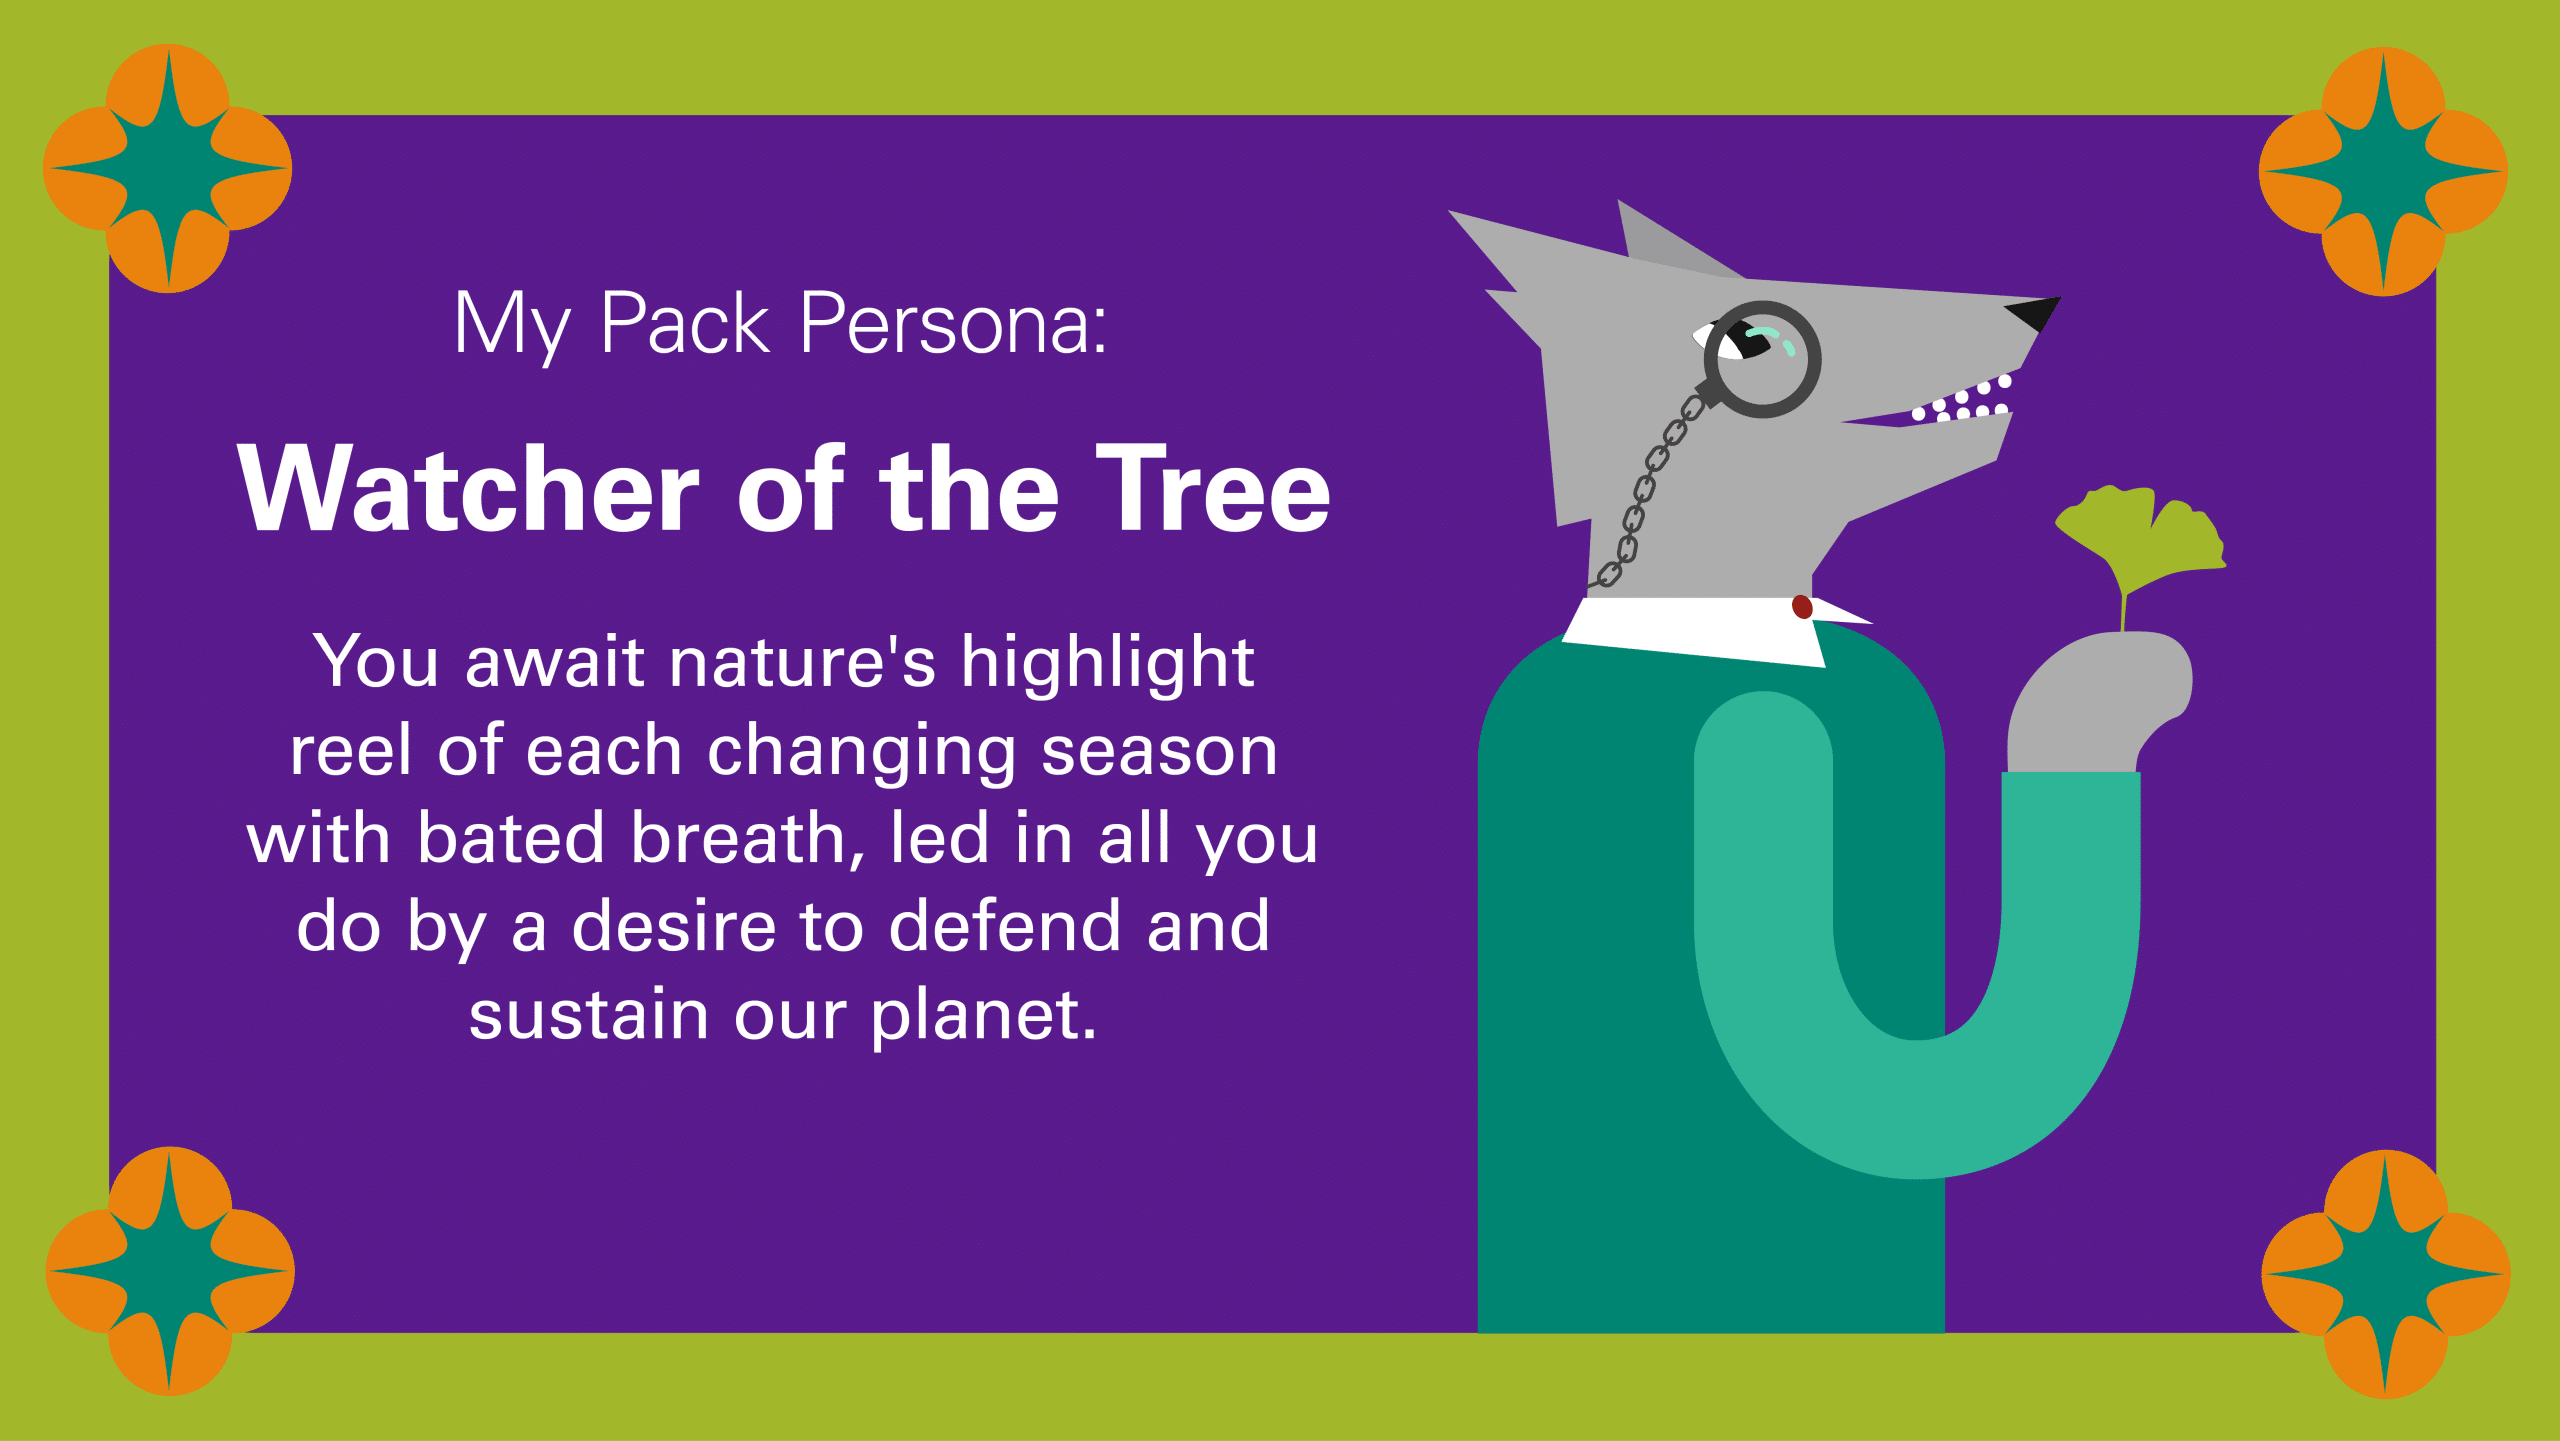 My Pack Persona: Watcher of The Tree You await nature's highlight reel of each changing season with bated breath, led in all you do by a desire to defend and sustain our planet